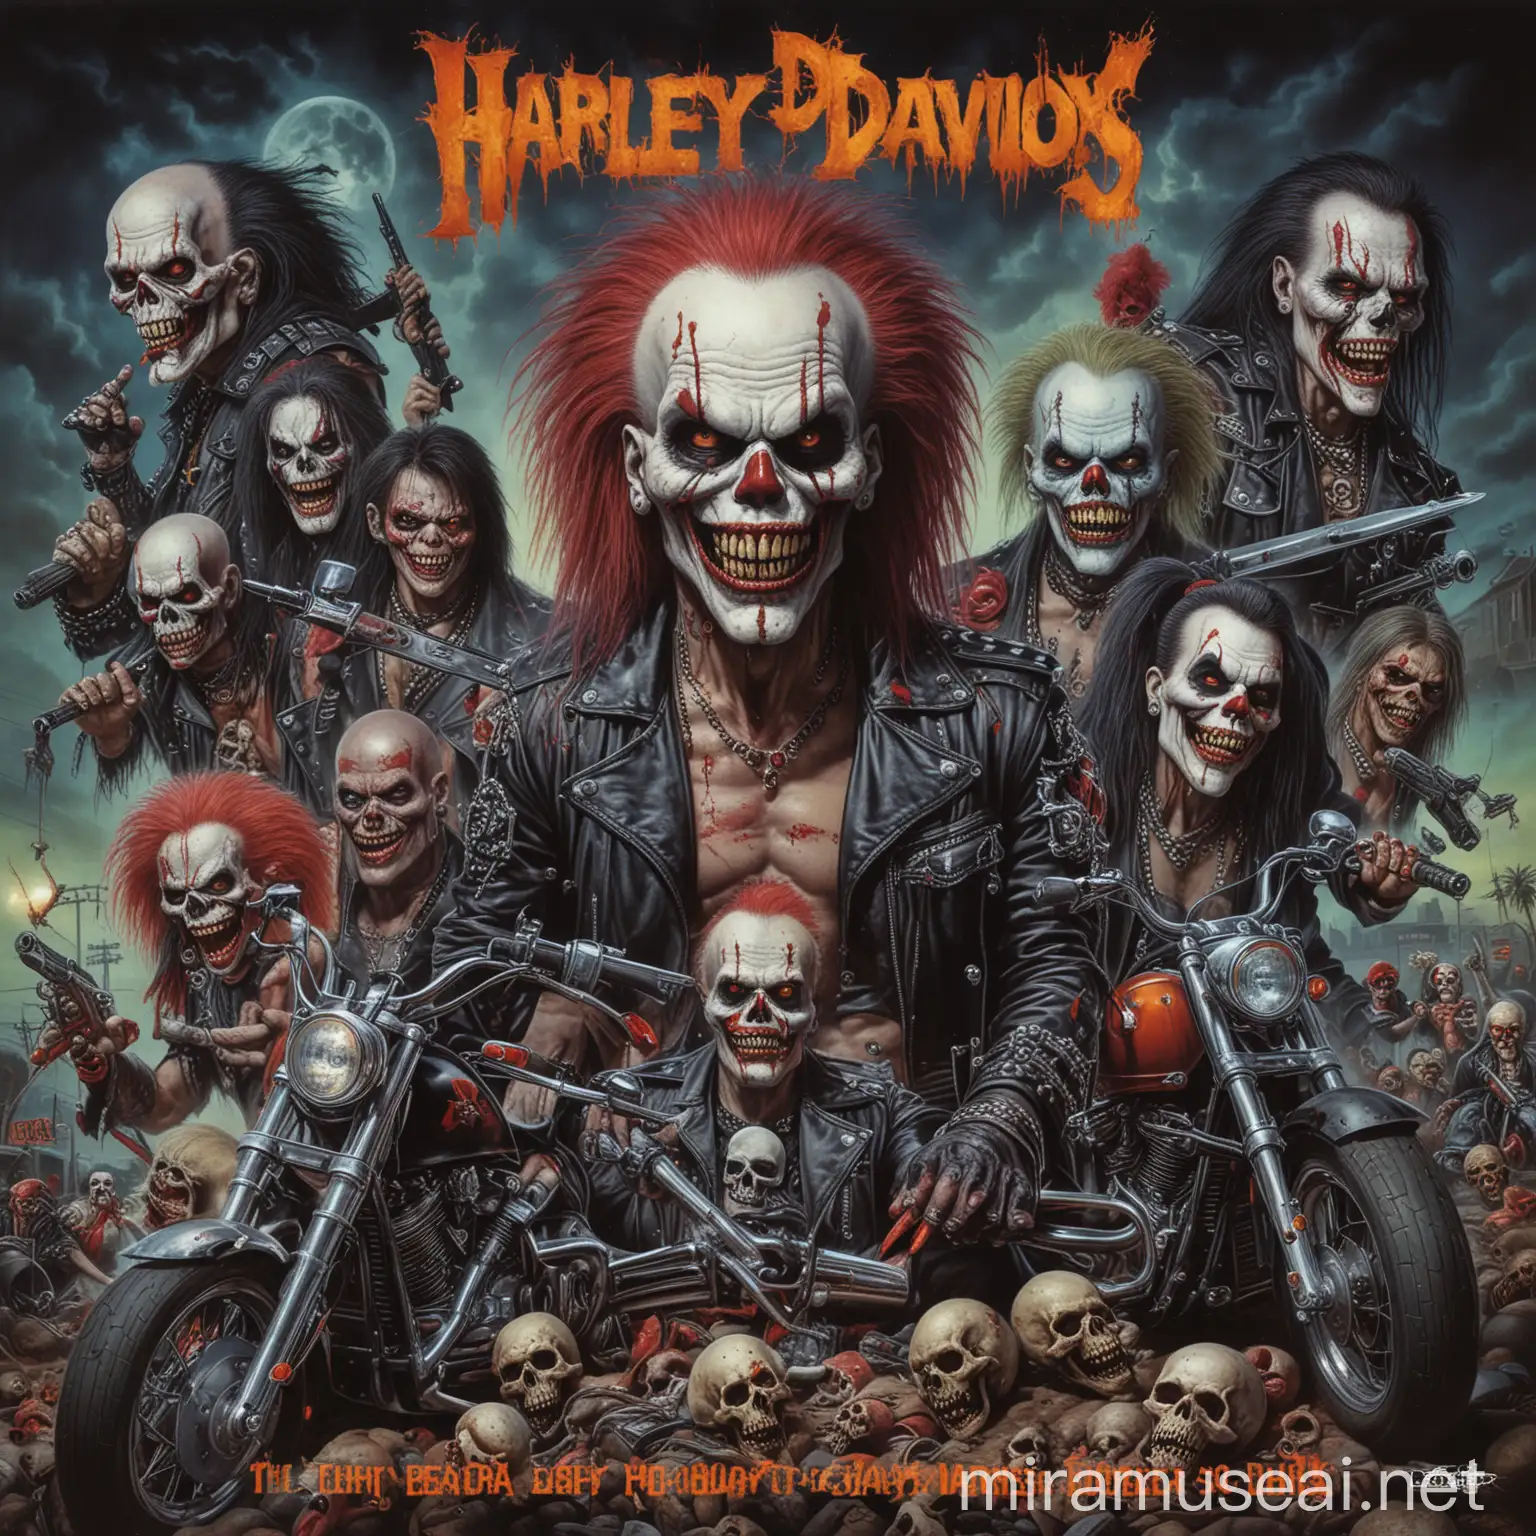 80s Heavy Metal Album Cover Skulls Harley Davidsons Clowns Zombies and Slashers in Los Angeles